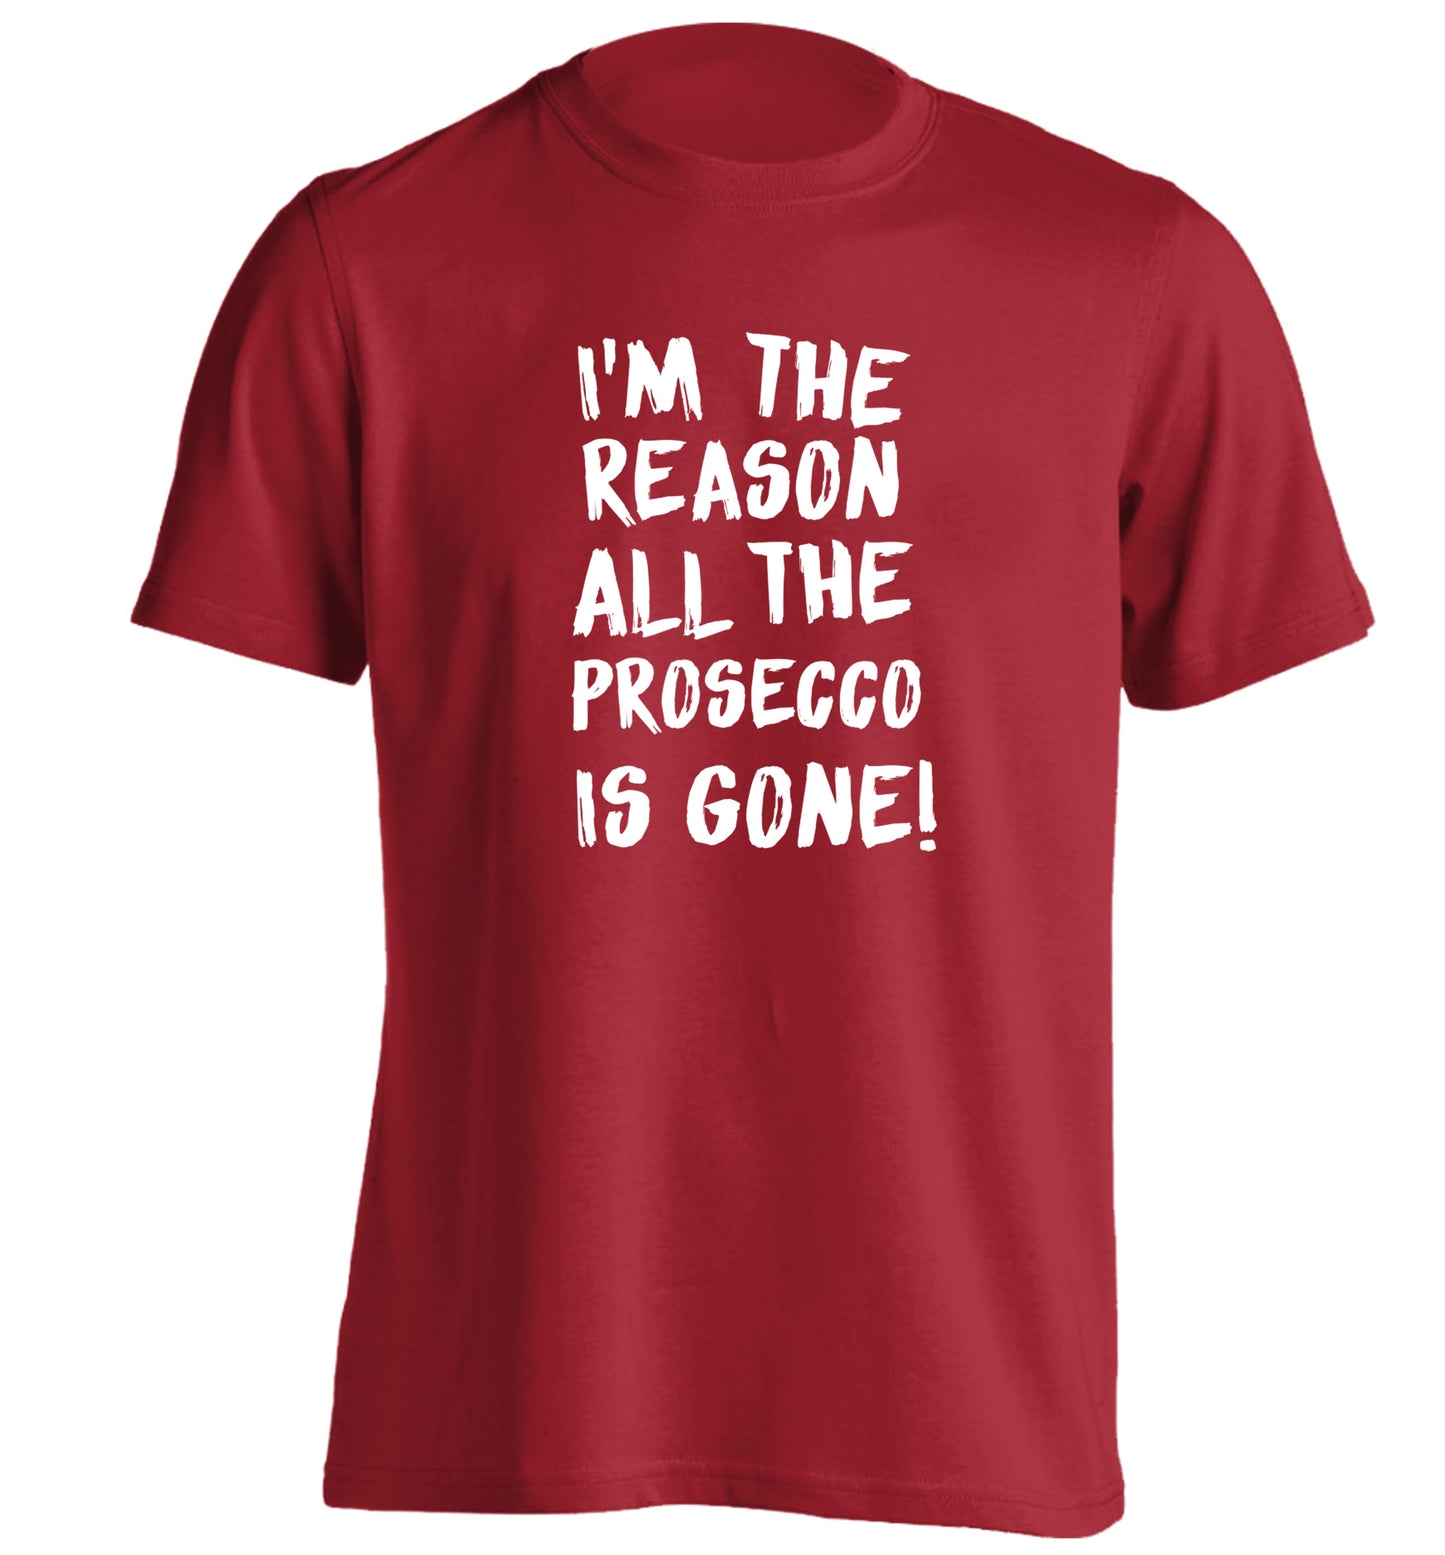 I'm the reason all the prosecco is gone adults unisex red Tshirt 2XL